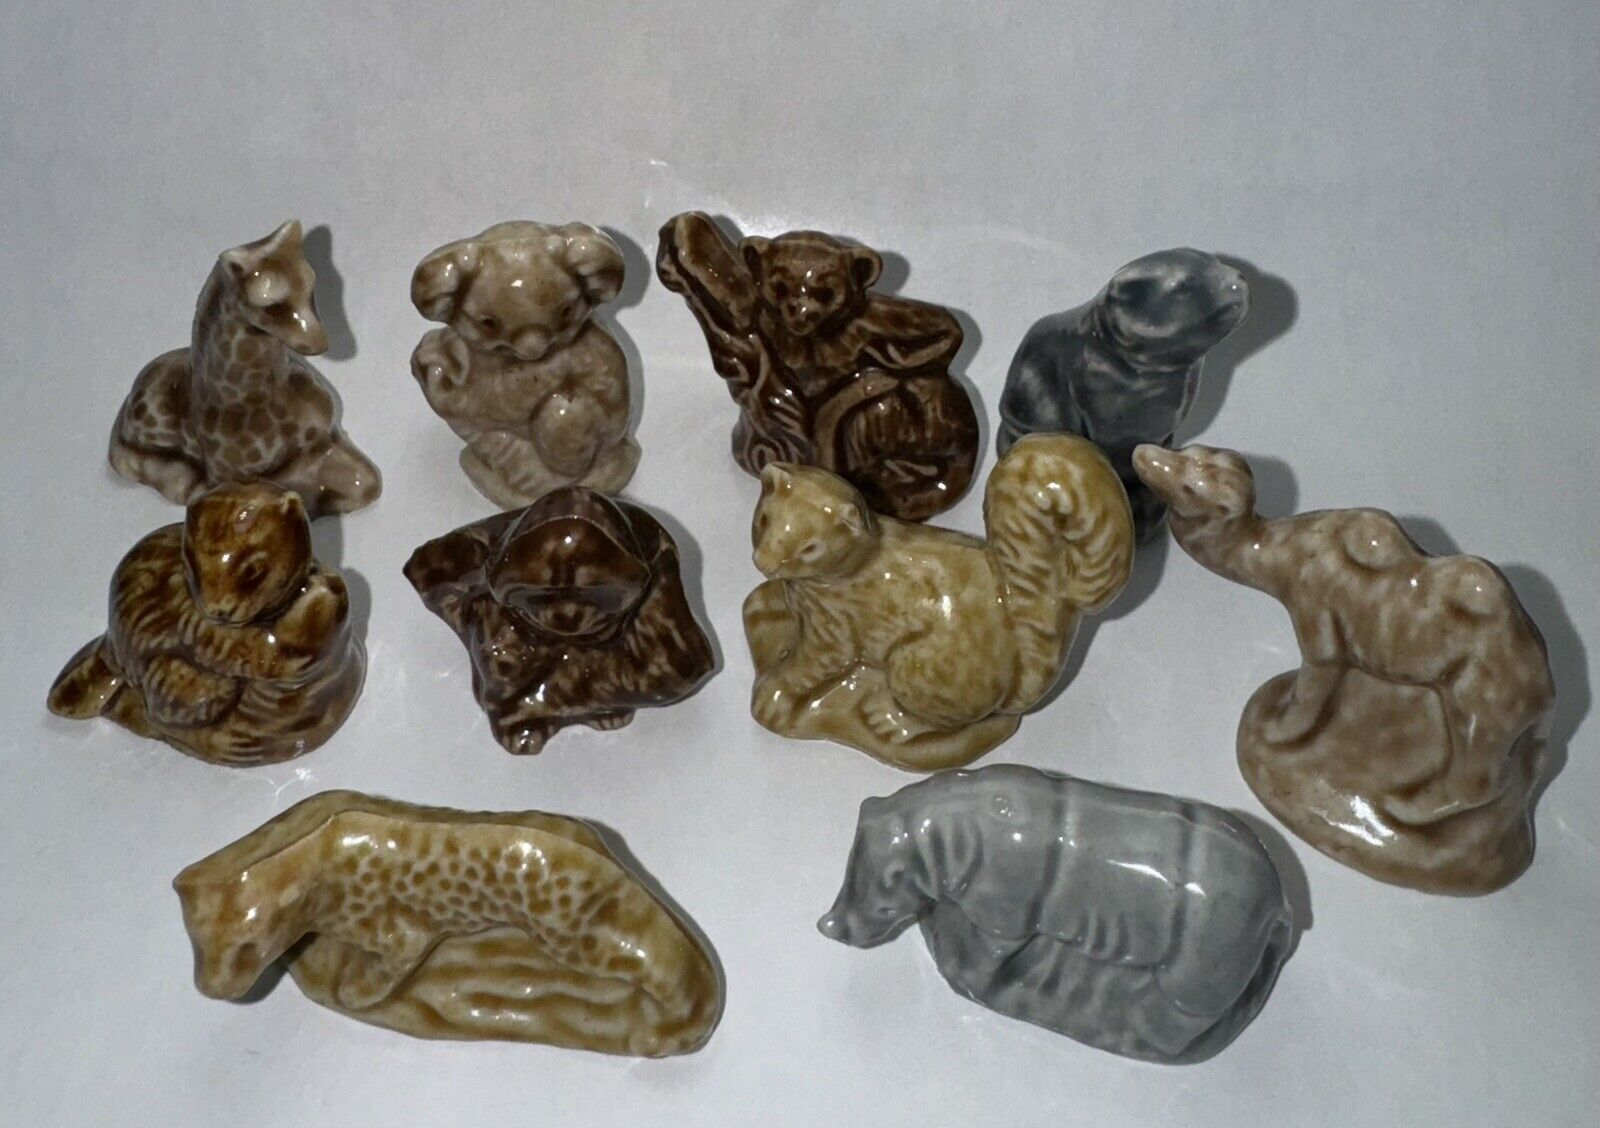 Vintage Lot of 10 Wade Whimsies England Figurines Collectibles